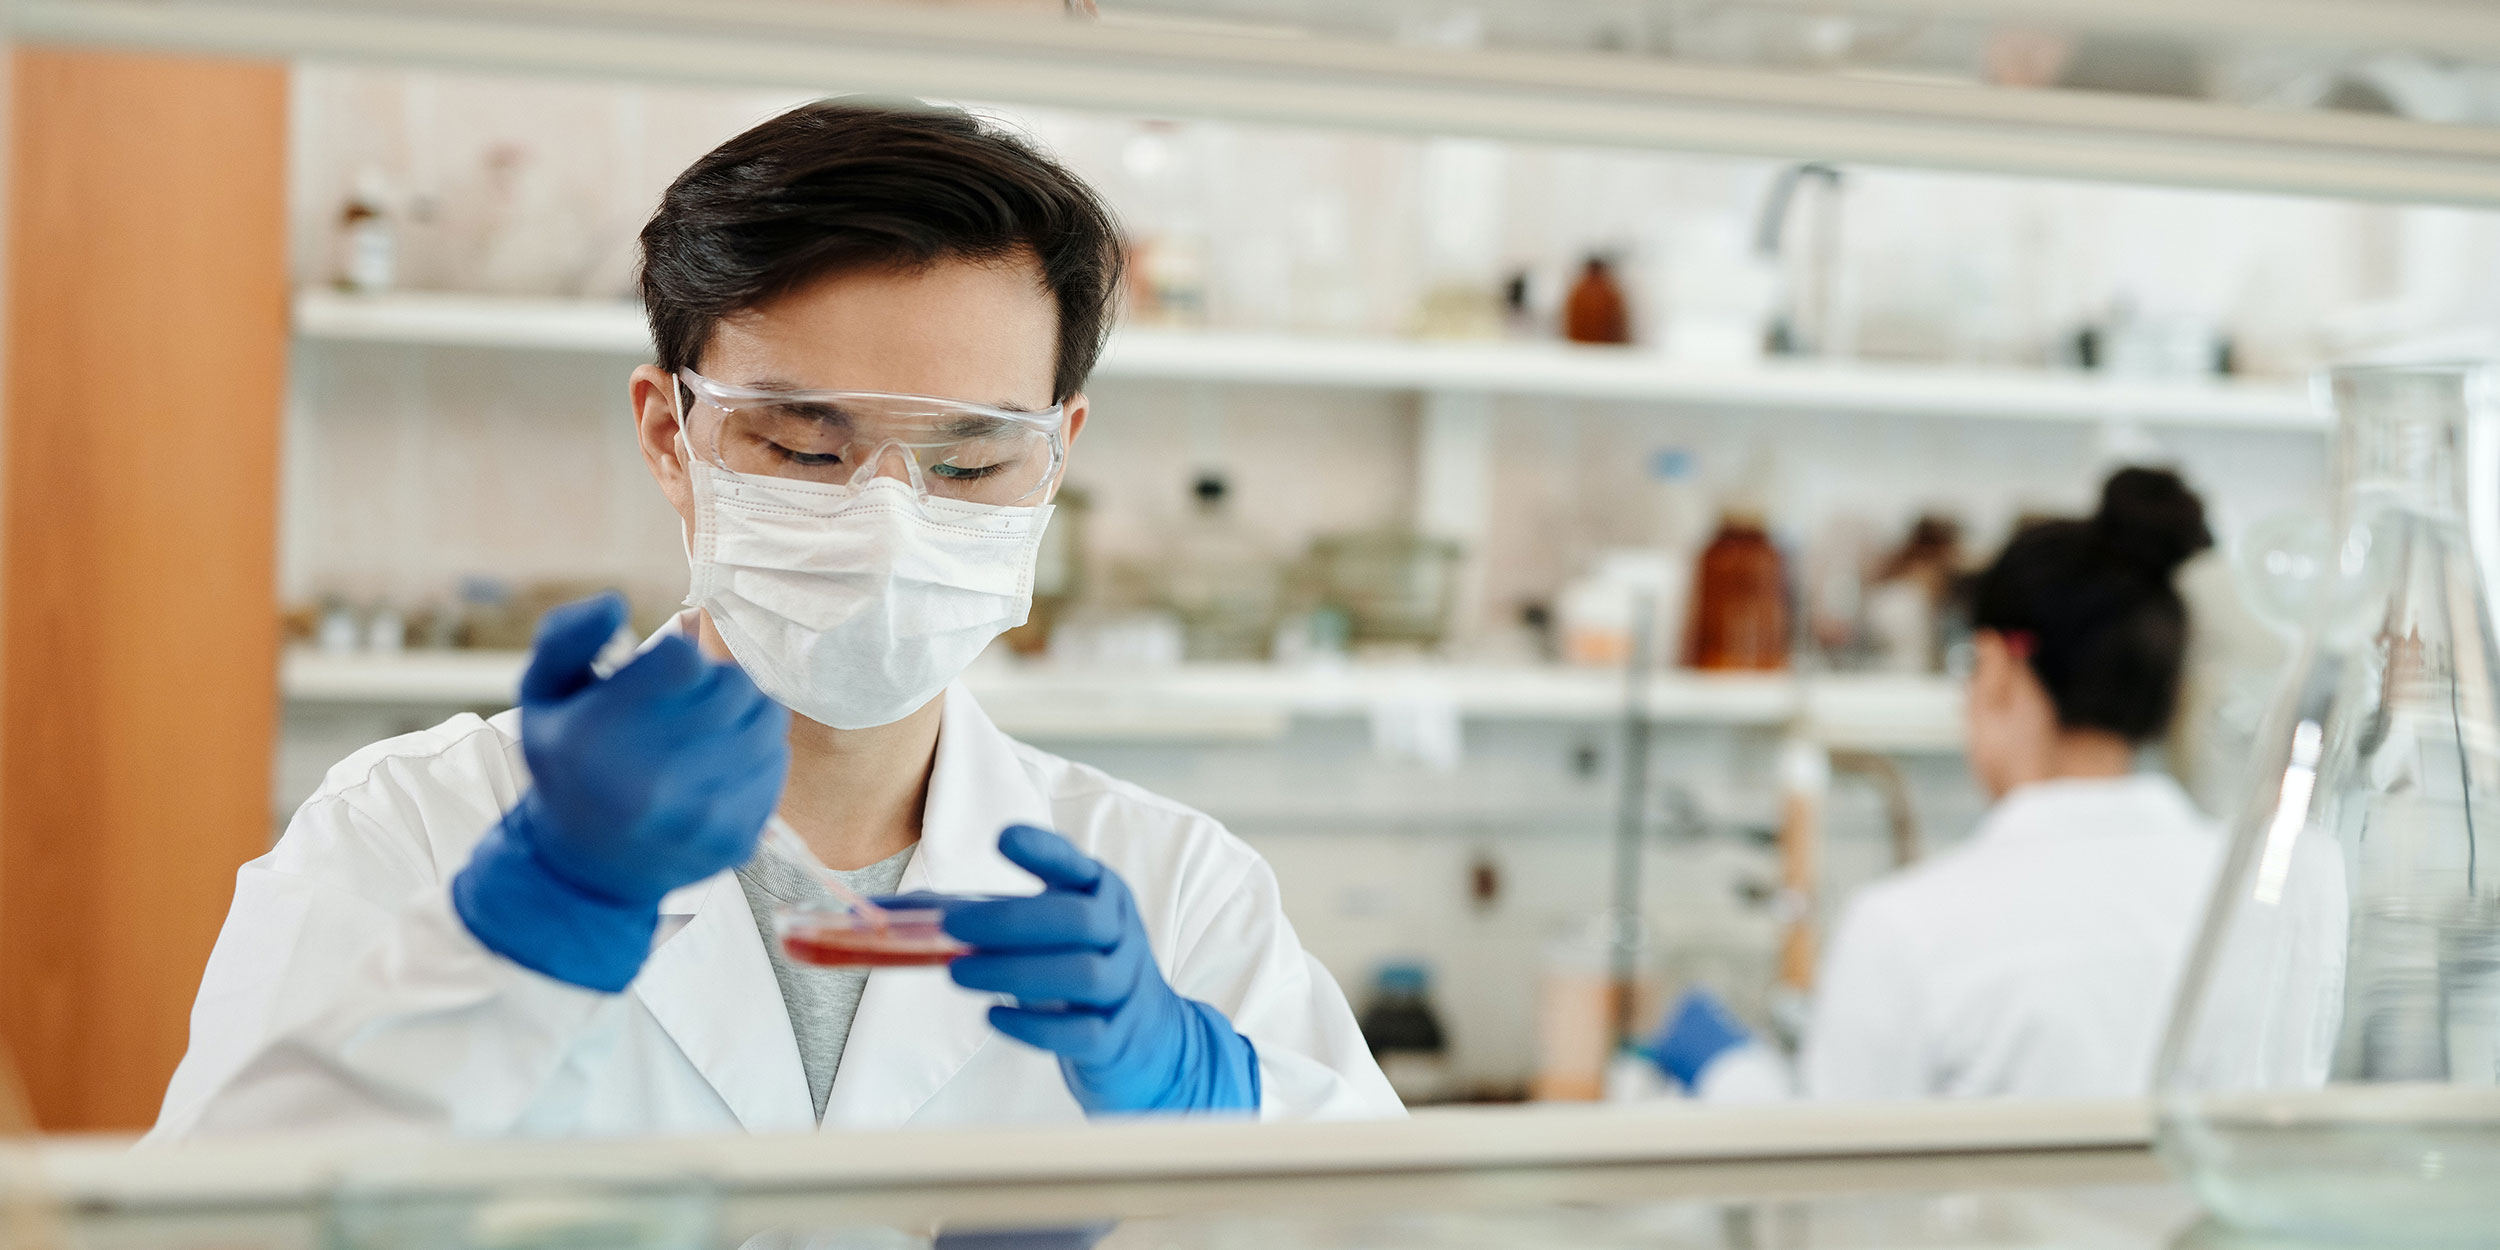 A researcher works in a lab